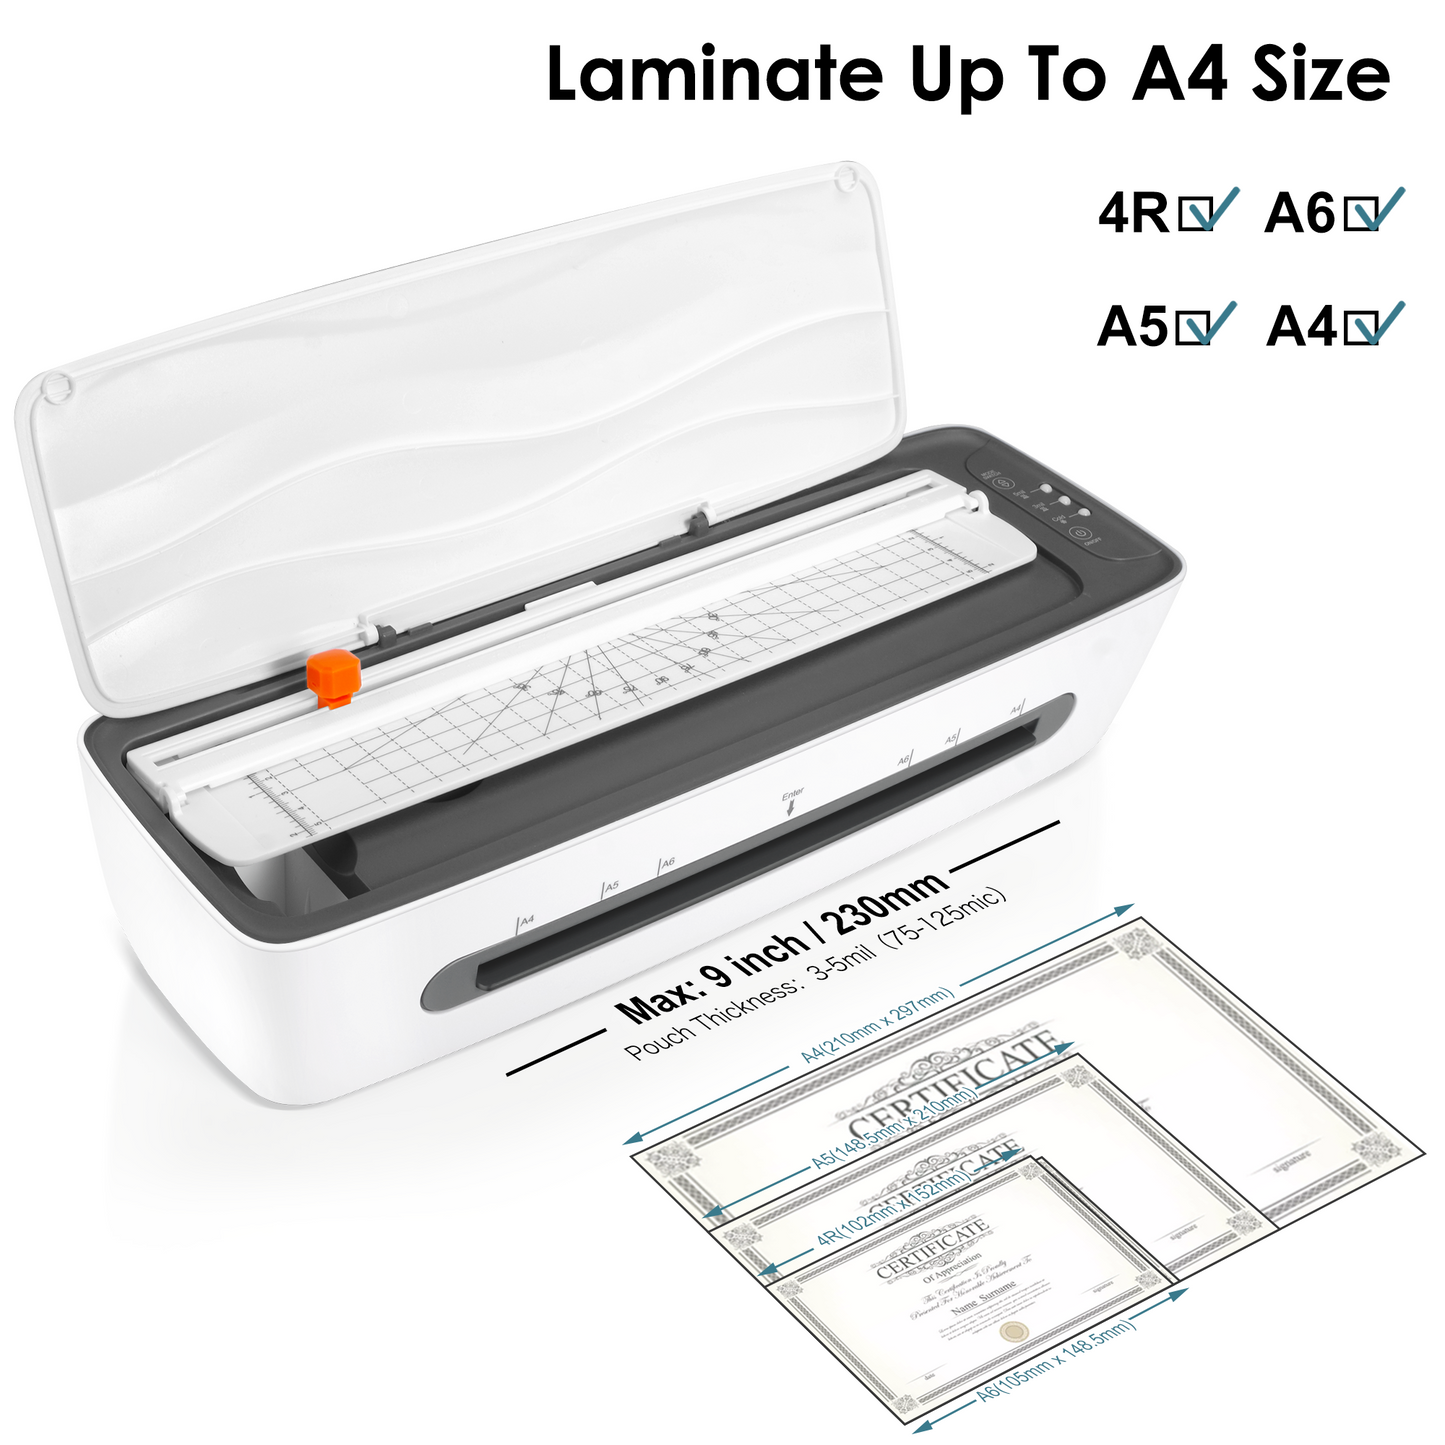 Laminator, A4 Laminator Machine, 9 Inch Cold-Thermal Laminator with 20 Pouches Sheets, 4-in-1 Personal Desktop Laminating Machine Built in Paper Cutter, Corner Rounder, Hole Puncher and Iron Ring